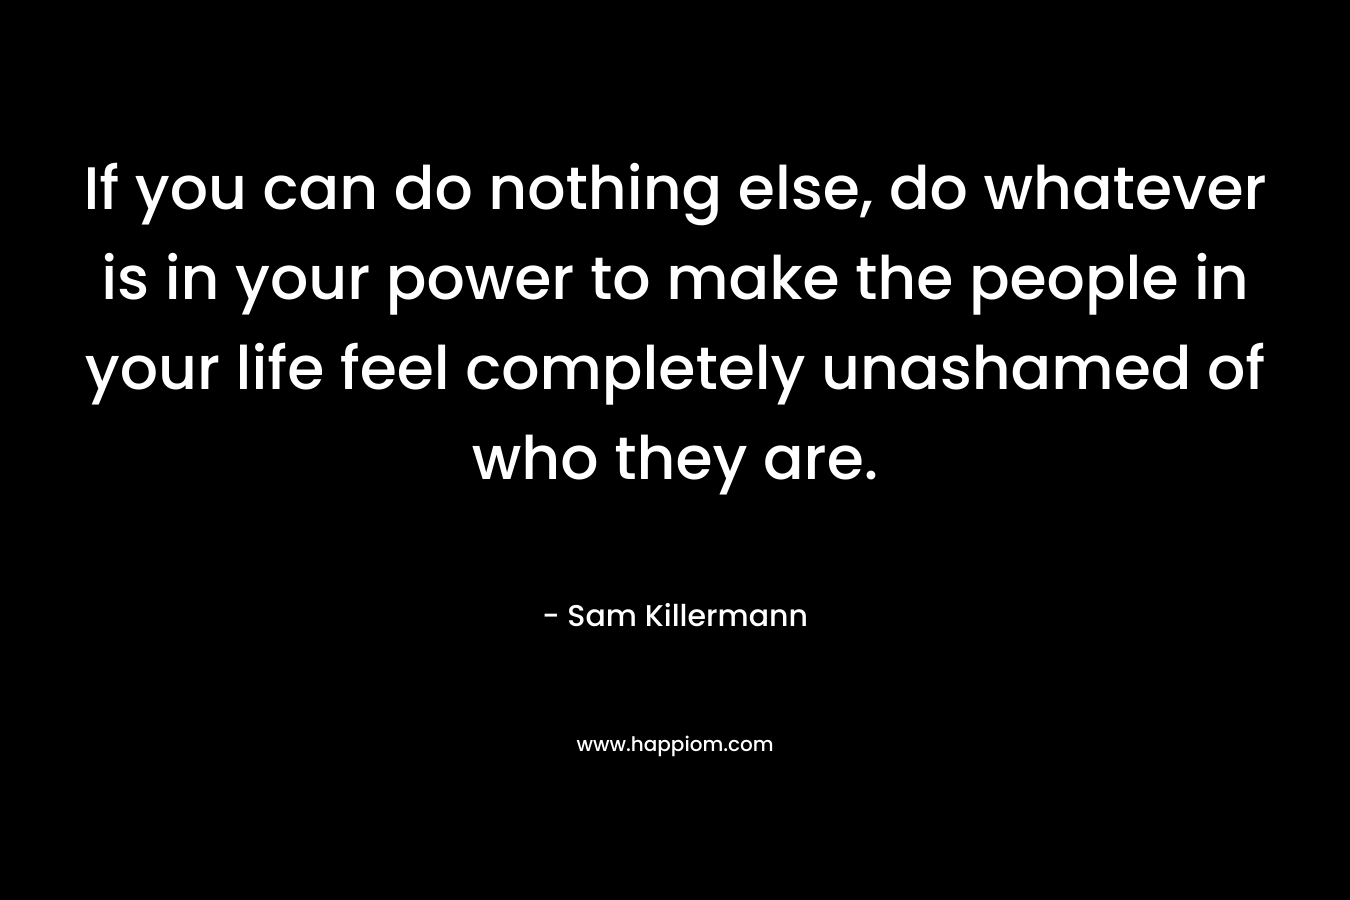 If you can do nothing else, do whatever is in your power to make the people in your life feel completely unashamed of who they are. – Sam Killermann